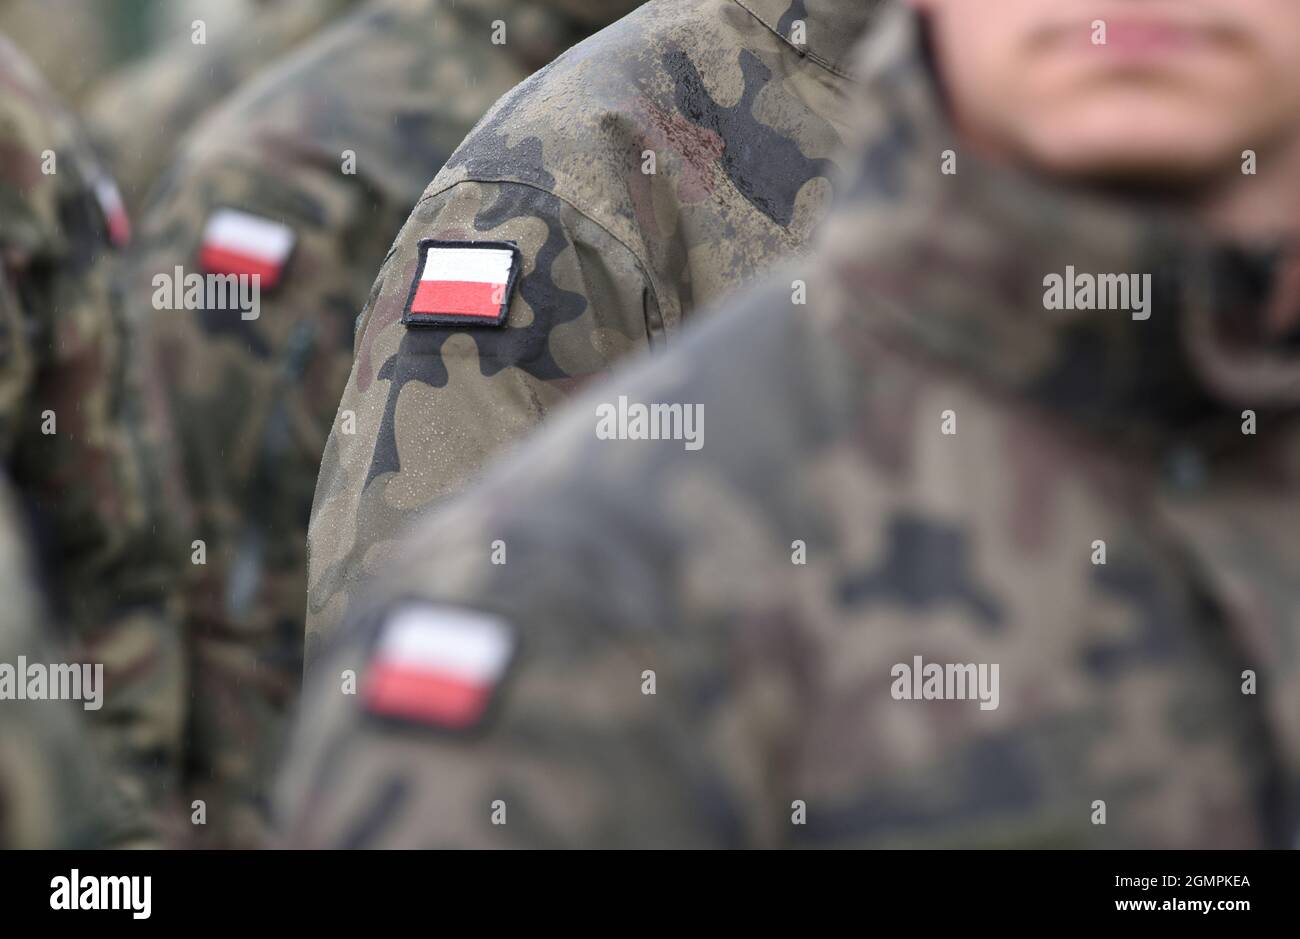 Polish Armed Forces. Armed Forces of the Republic of Poland. Flags of Poland on military uniform. Polish army. Stock Photo